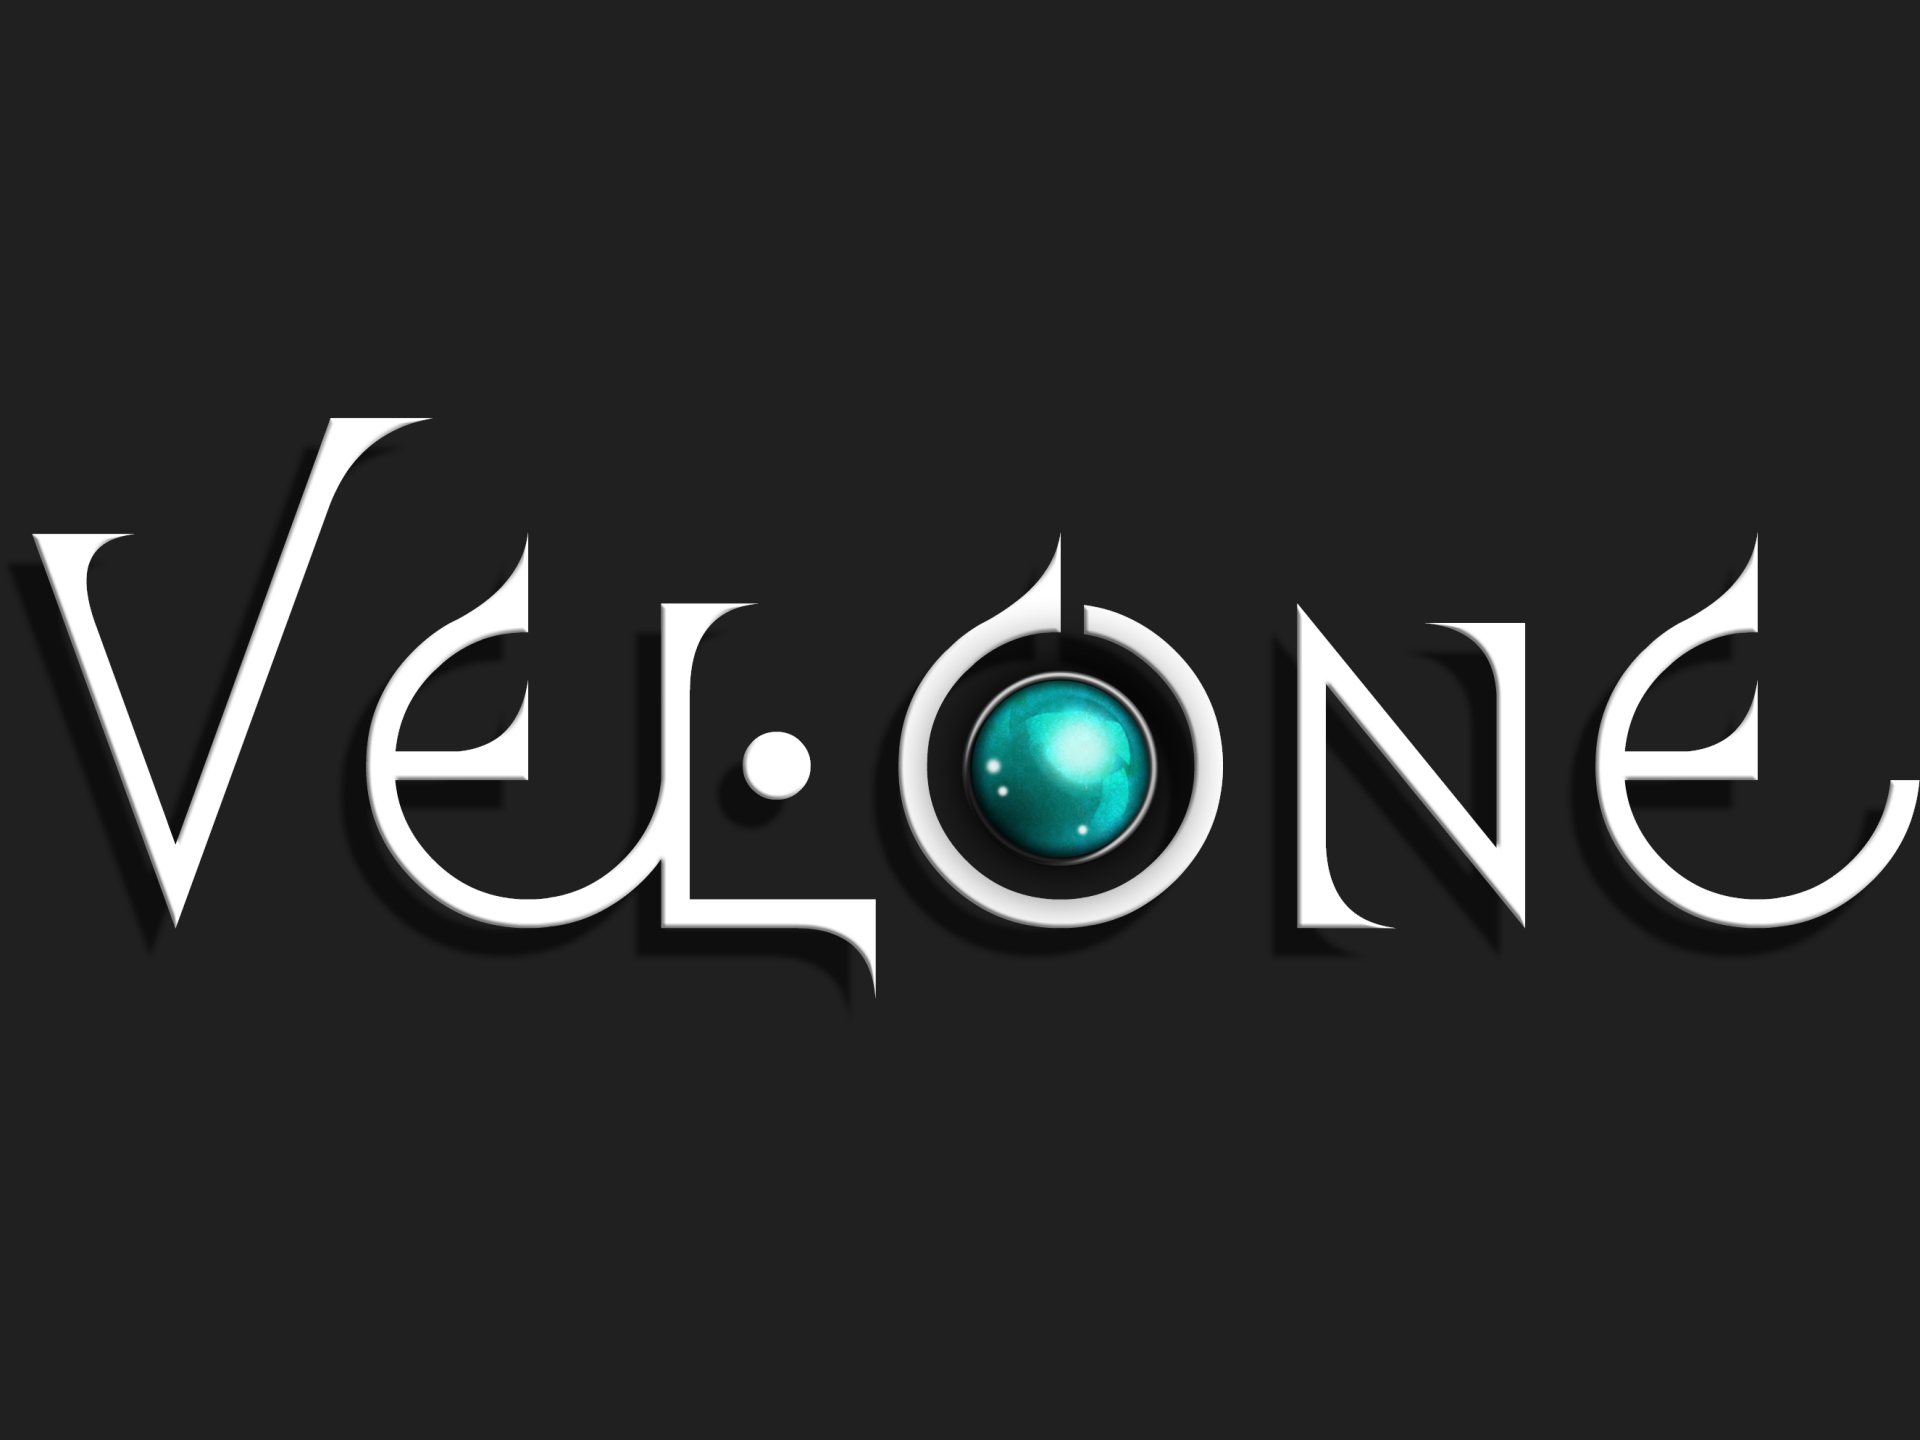 velone フョグライト 白色の+researchafricapublications.com